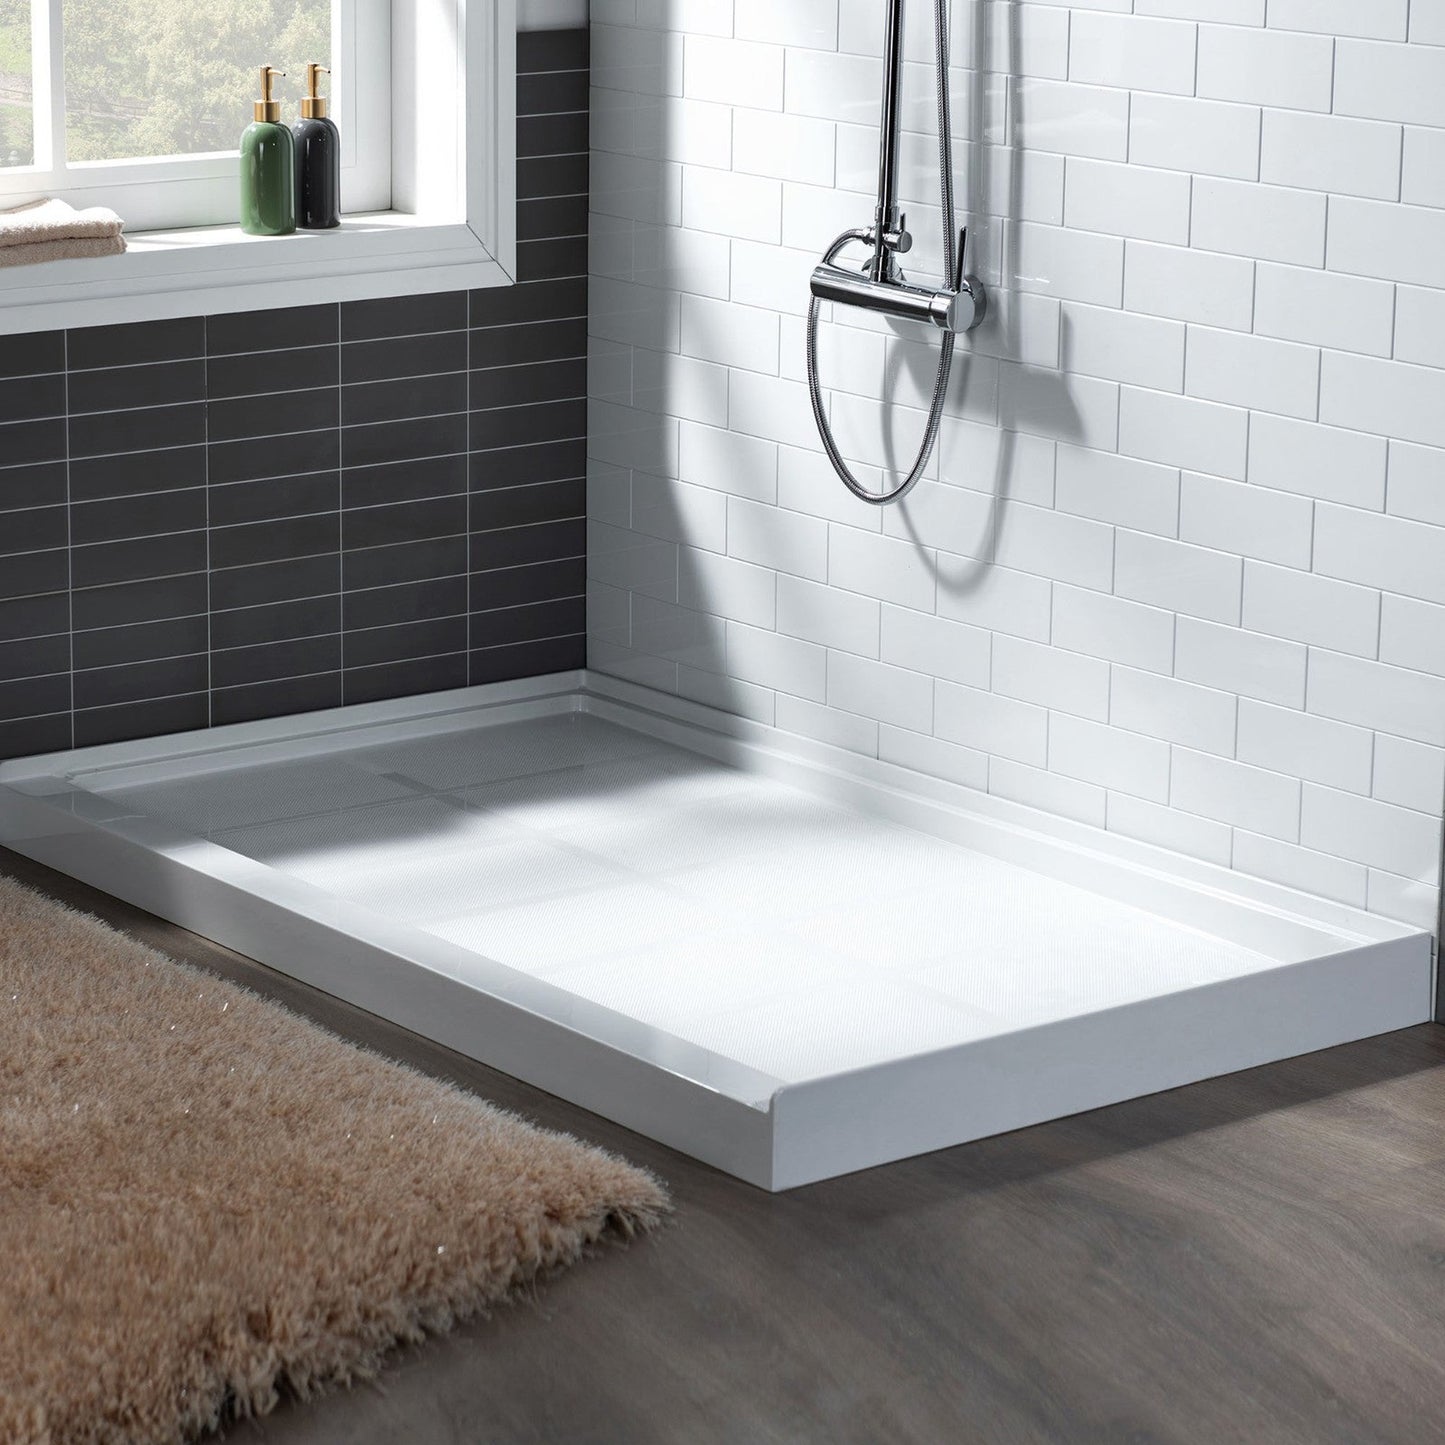 WoodBridge 60" x 34" White Solid Surface Shower Base Right Drain Location With Brushed Nickel Trench Drain Cover